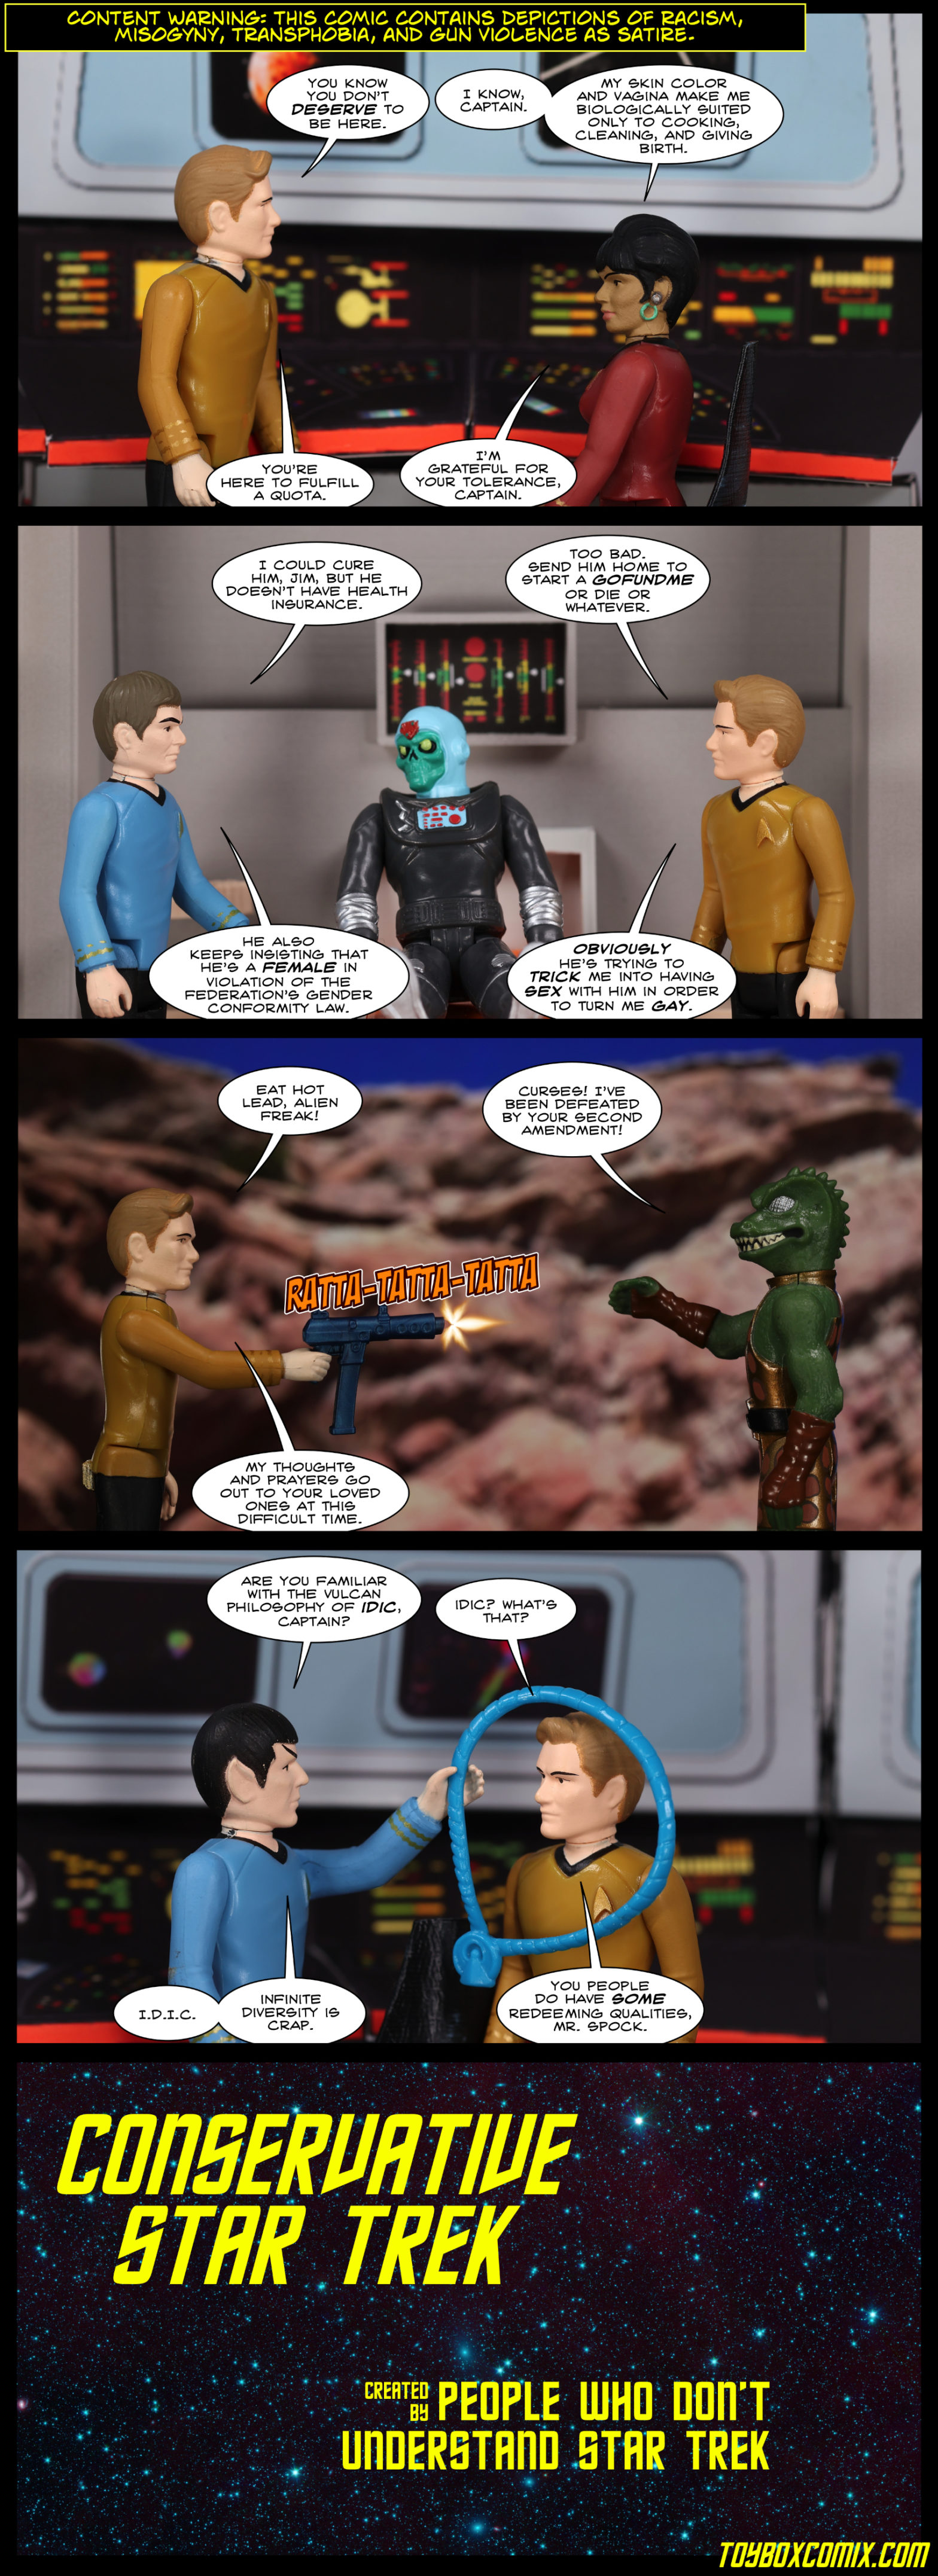 Content warning: this comic contains depictions of racism, misogyny, transphobia, and gun violence as satire. Panel 1: Location: TOS Enterprise bridge. Kirk: “You know you don’t deserve to be here.” Uhura: “I know, Captain. My skin color and vagina make me biologically suited only to cooking, cleaning, and giving birth.” Kirk: “You’re here to fulfill a quota.” Uhura: “I’m grateful for your tolerance, Captain.” Panel 2: Location: Sickbay. An Astro Zombie sits on the biobed. McCoy: “I could cure him, Jim, but he doesn’t have health insurance.” Kirk: “Too bad. Send him home to start a GoFundMe or die or whatever.” McCoy: “He also keeps insisting that he’s a female in violation of the Federation’s gender conformity law.” Kirk: “Obviously he’s trying to trick me into having sex with him in order to turn me gay.” Panel 3: Location: Vasquez Rocks. Kirk, firing an automatic weapon: “Eat hot lead, alien freak!” Gorn captain: “Curses! I’ve been defeated by your second amendment!” Kirk: “My thoughts and prayers go out to your loved ones at this difficult time.” Panel 4: Location: bridge. Spock, holding an IDIC necklace: “Are you familiar with the Vulcan philosophy of IDIC, Captain?” Kirk: “Idic? What’s that?” Spock: “I.D.I.C. Infinite Diversity is Crap.” Kirk: “You people do have some redeeming qualities, Mr. Spock.” Panel 5: TOS title screen style text on a star field: “Conservative Star Trek, created by people who don’t understand Star Trek.”